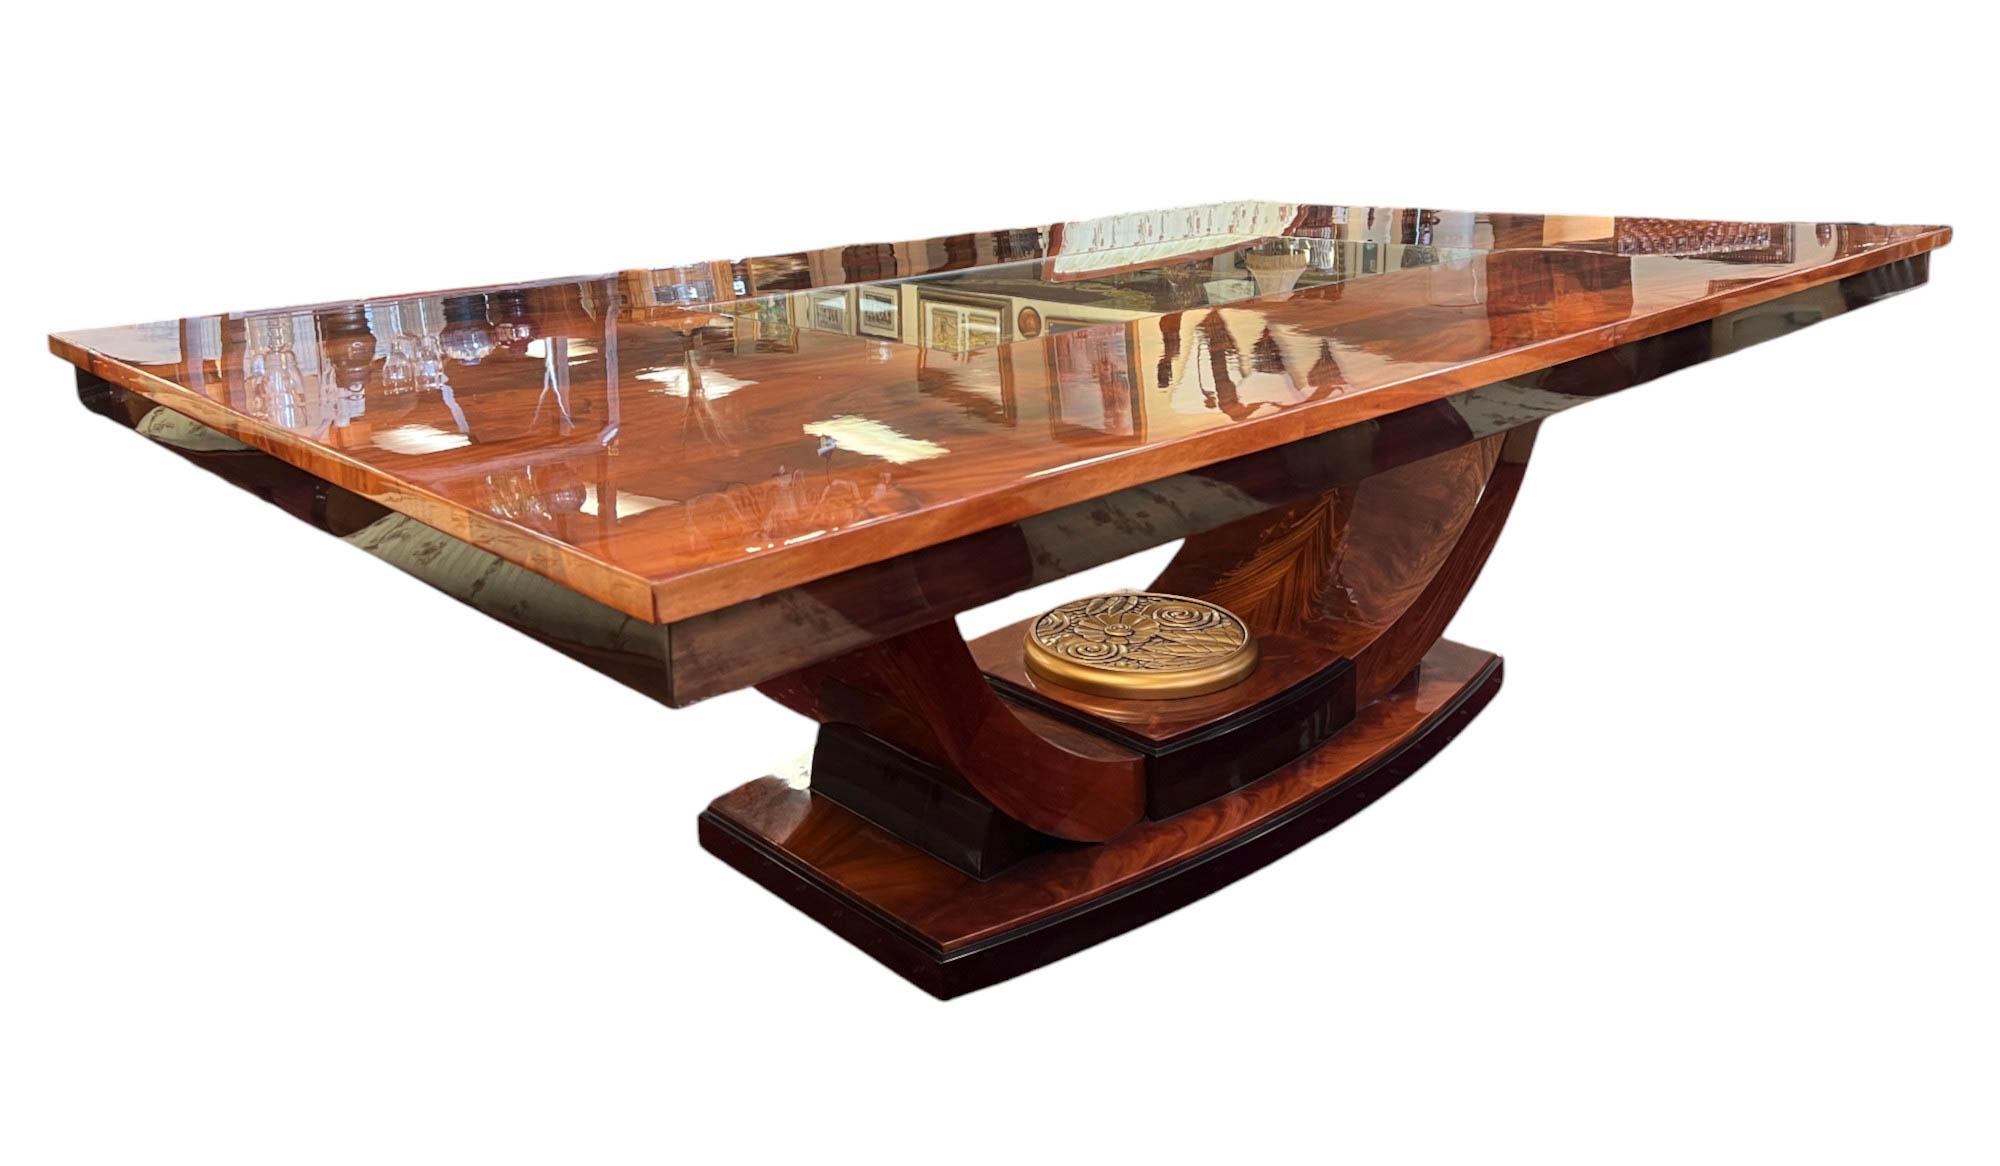 Introducing our magnificent English art deco-styled flame mahogany veneer dining table. Crafted from hardwood and finished in flame mahogany veneer, also known as crotch mahogany, this dining table boasts a stunning high-gloss finish that